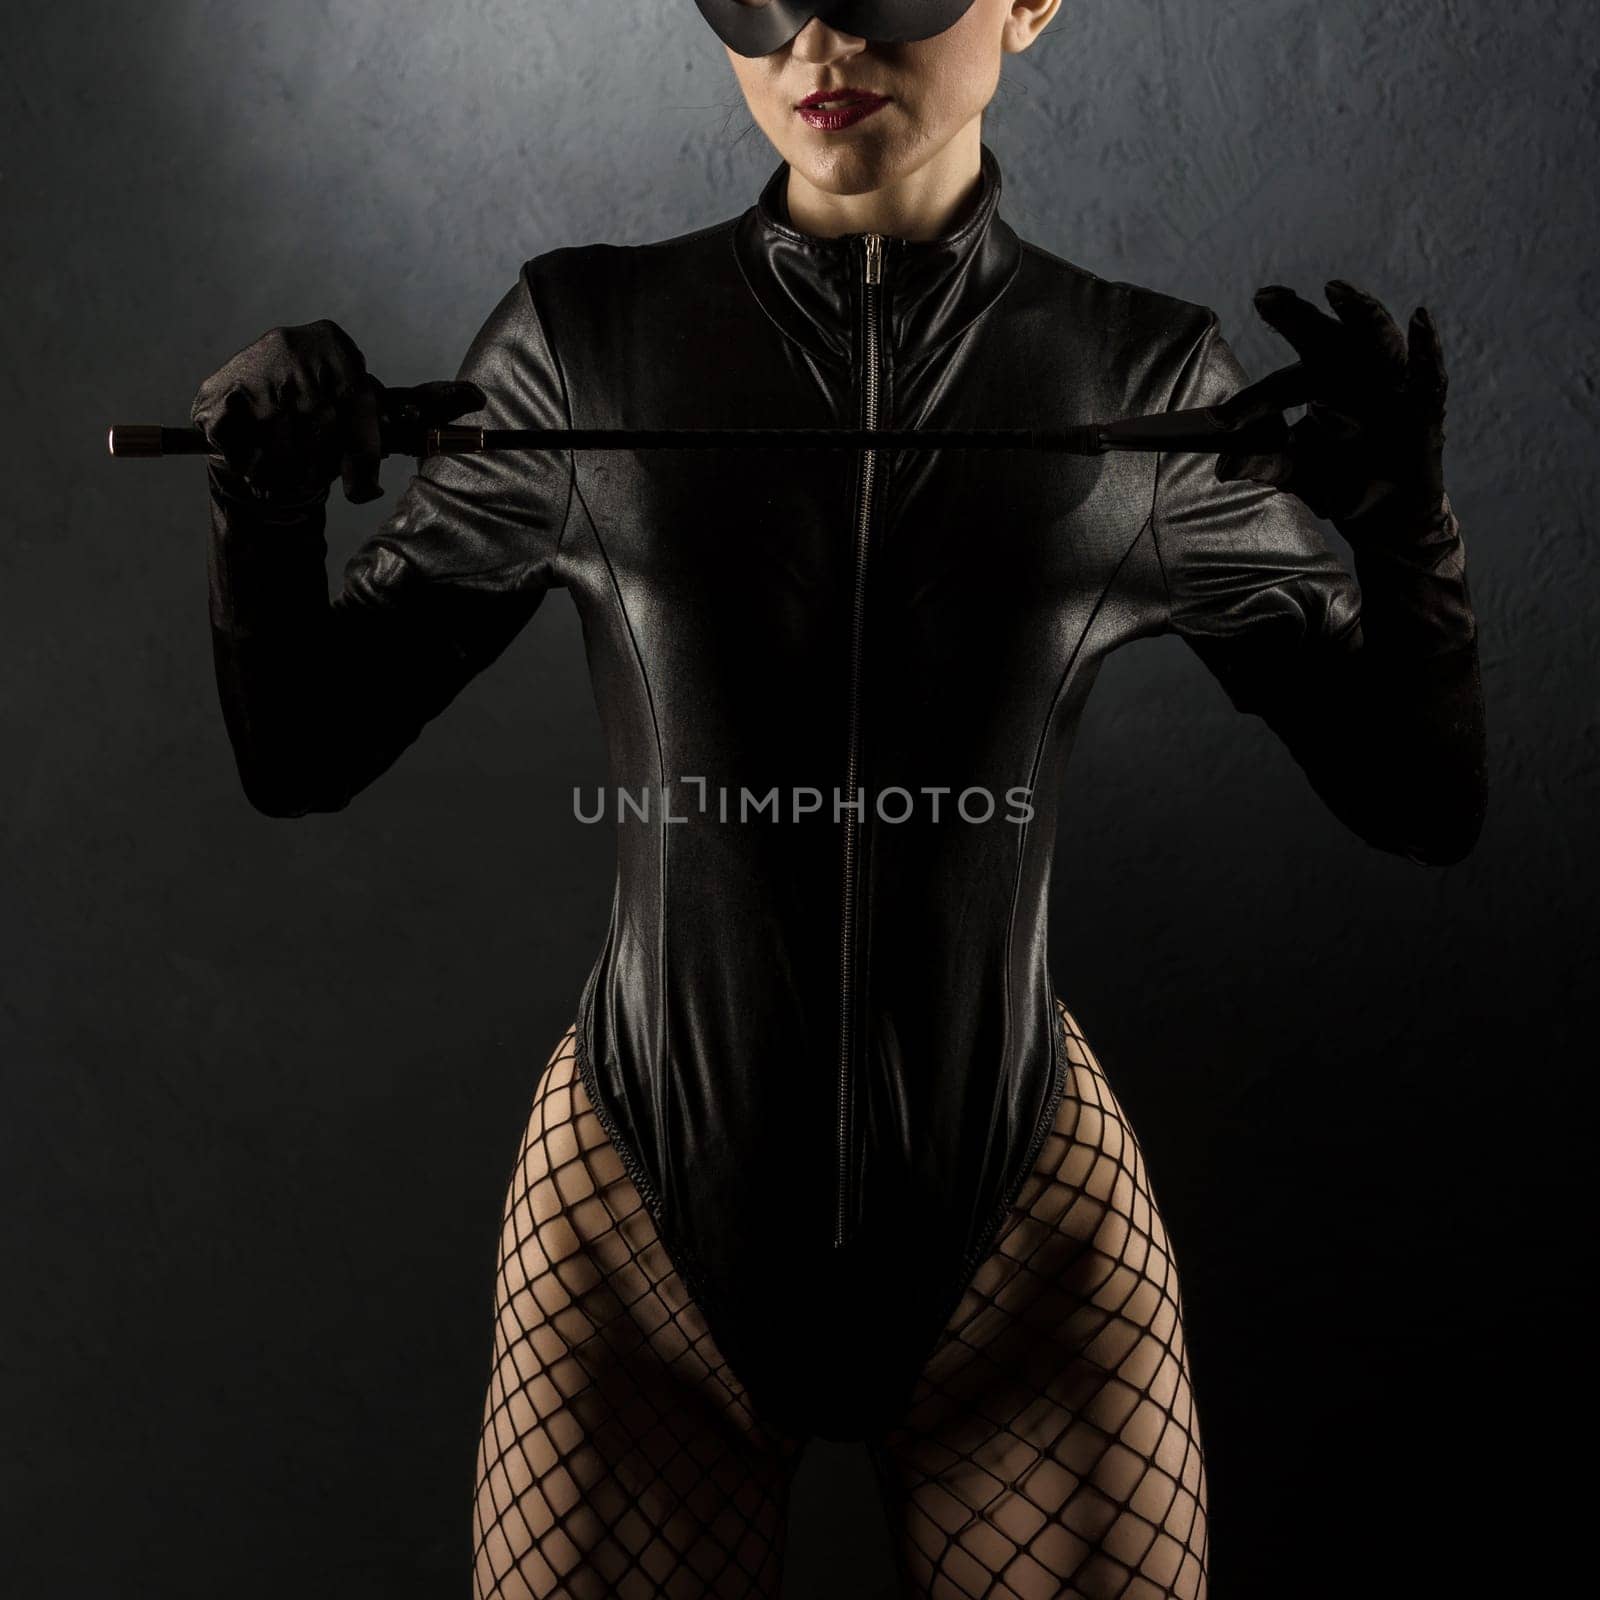 Adult sex games. Beautiful dominant brunette vamp mistress girl in latex body, gloves posing with riding crop. - image